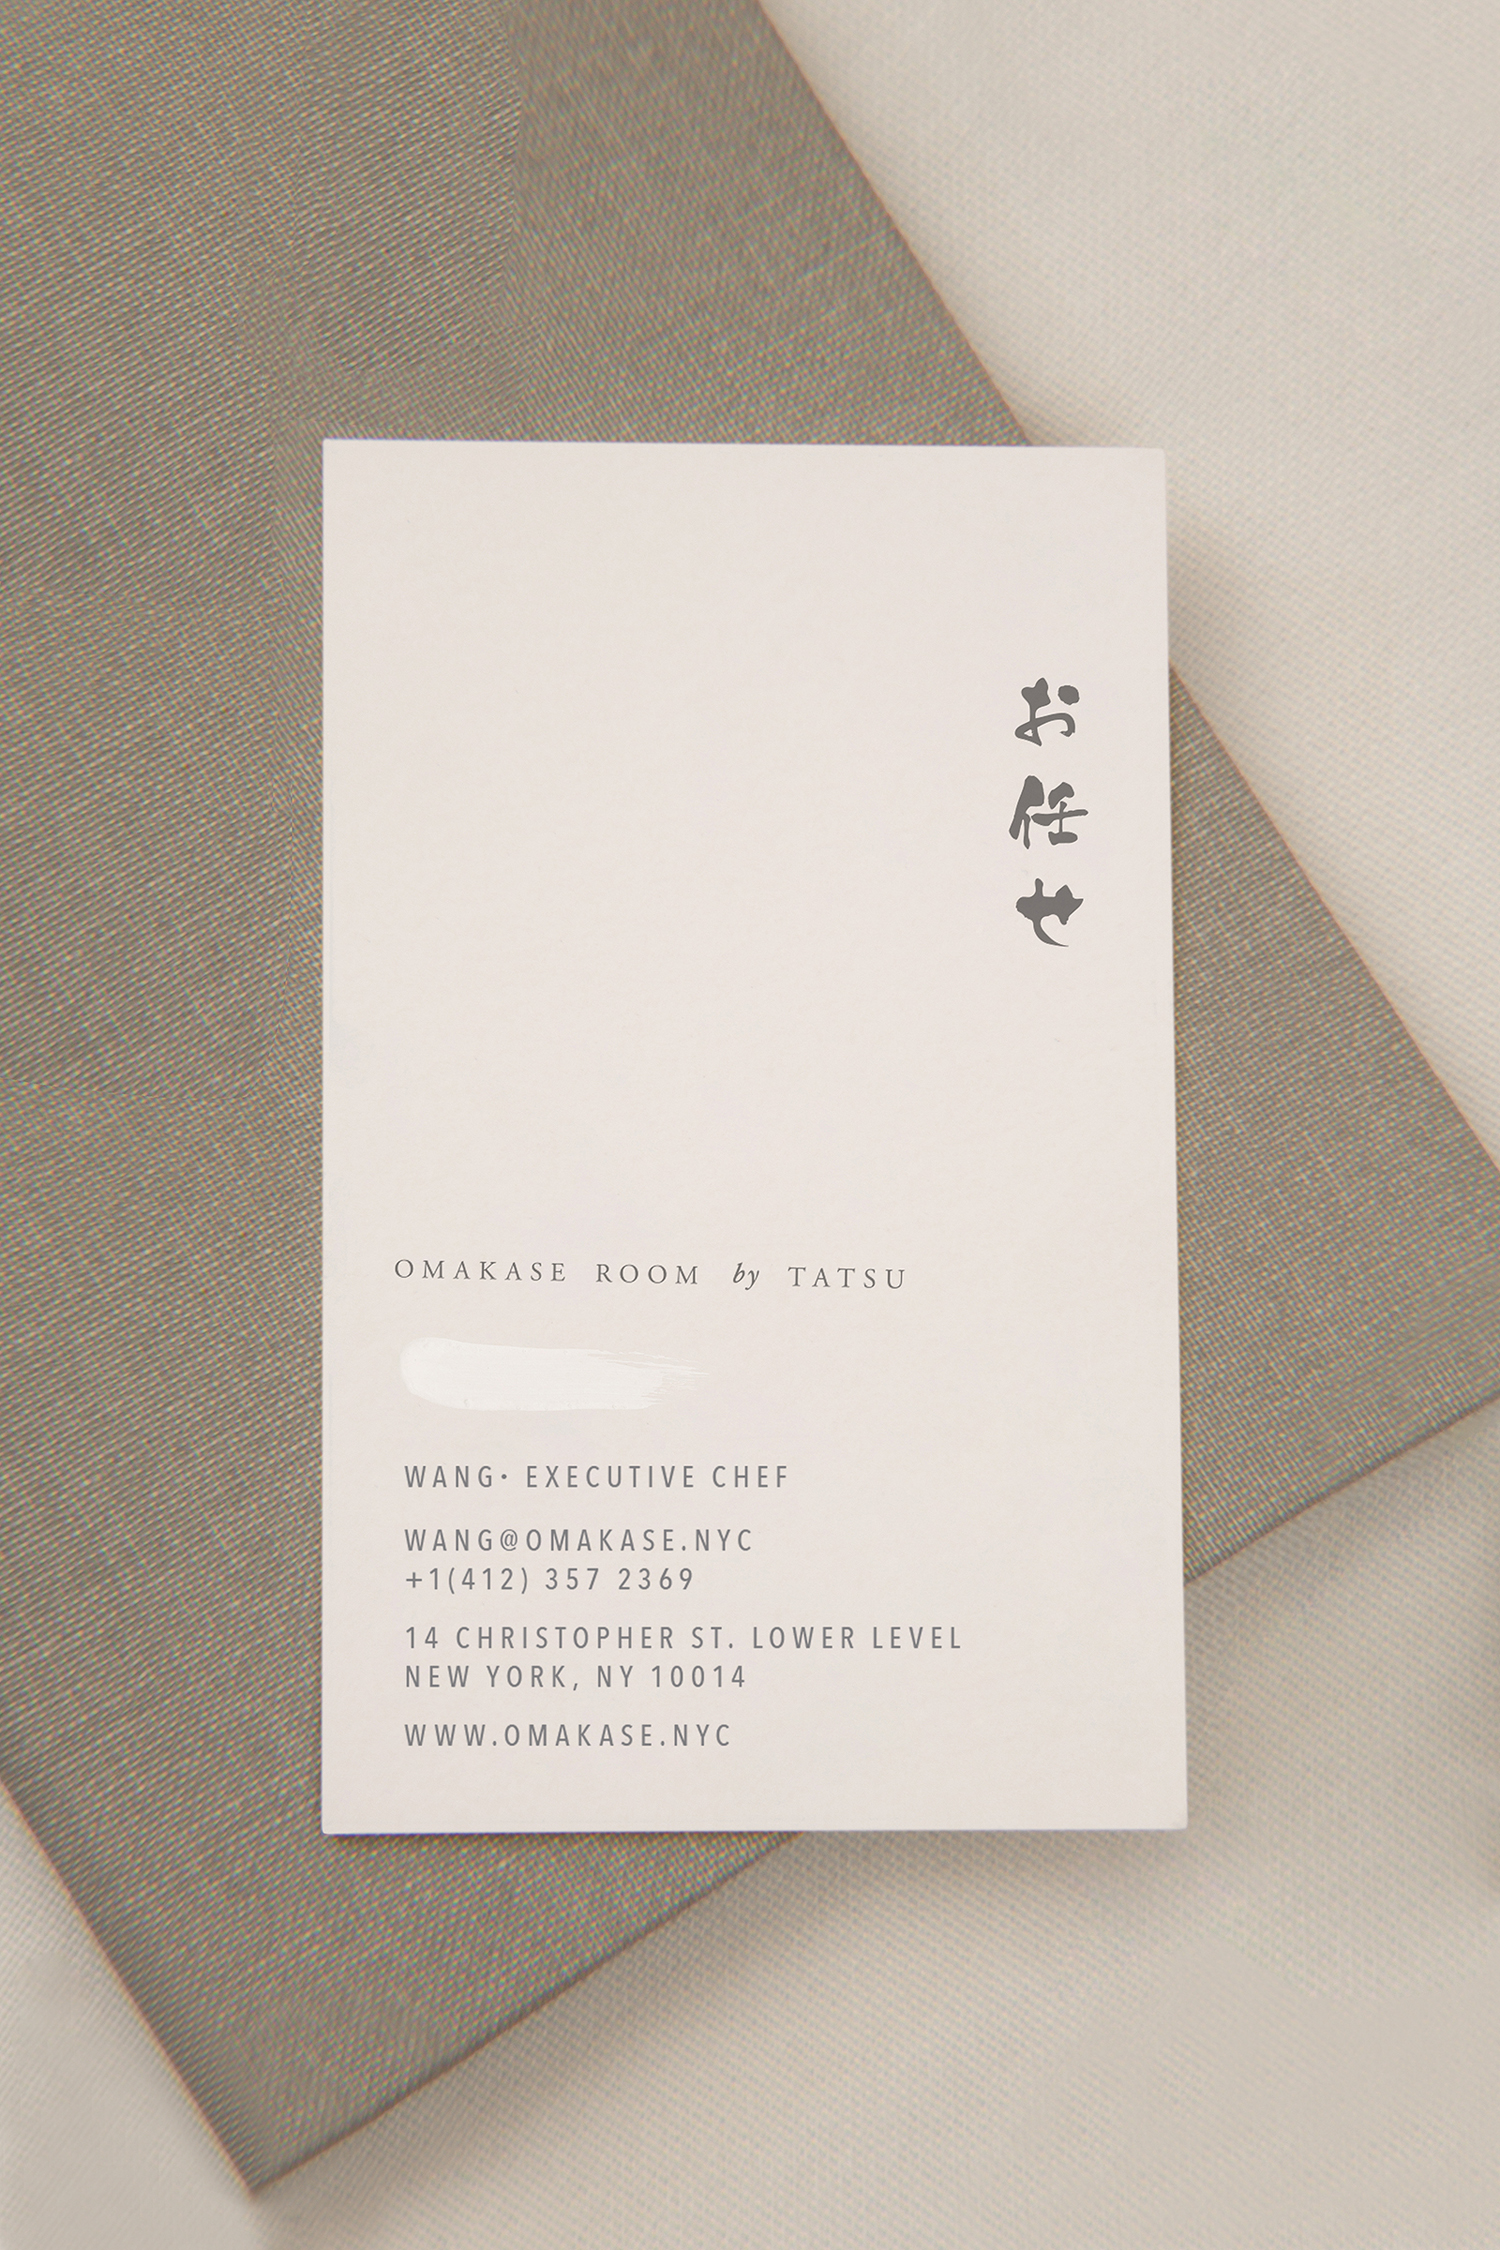 Visual identity and business card designed by Savvy for New York restaurant Omakase Room by Tatsu